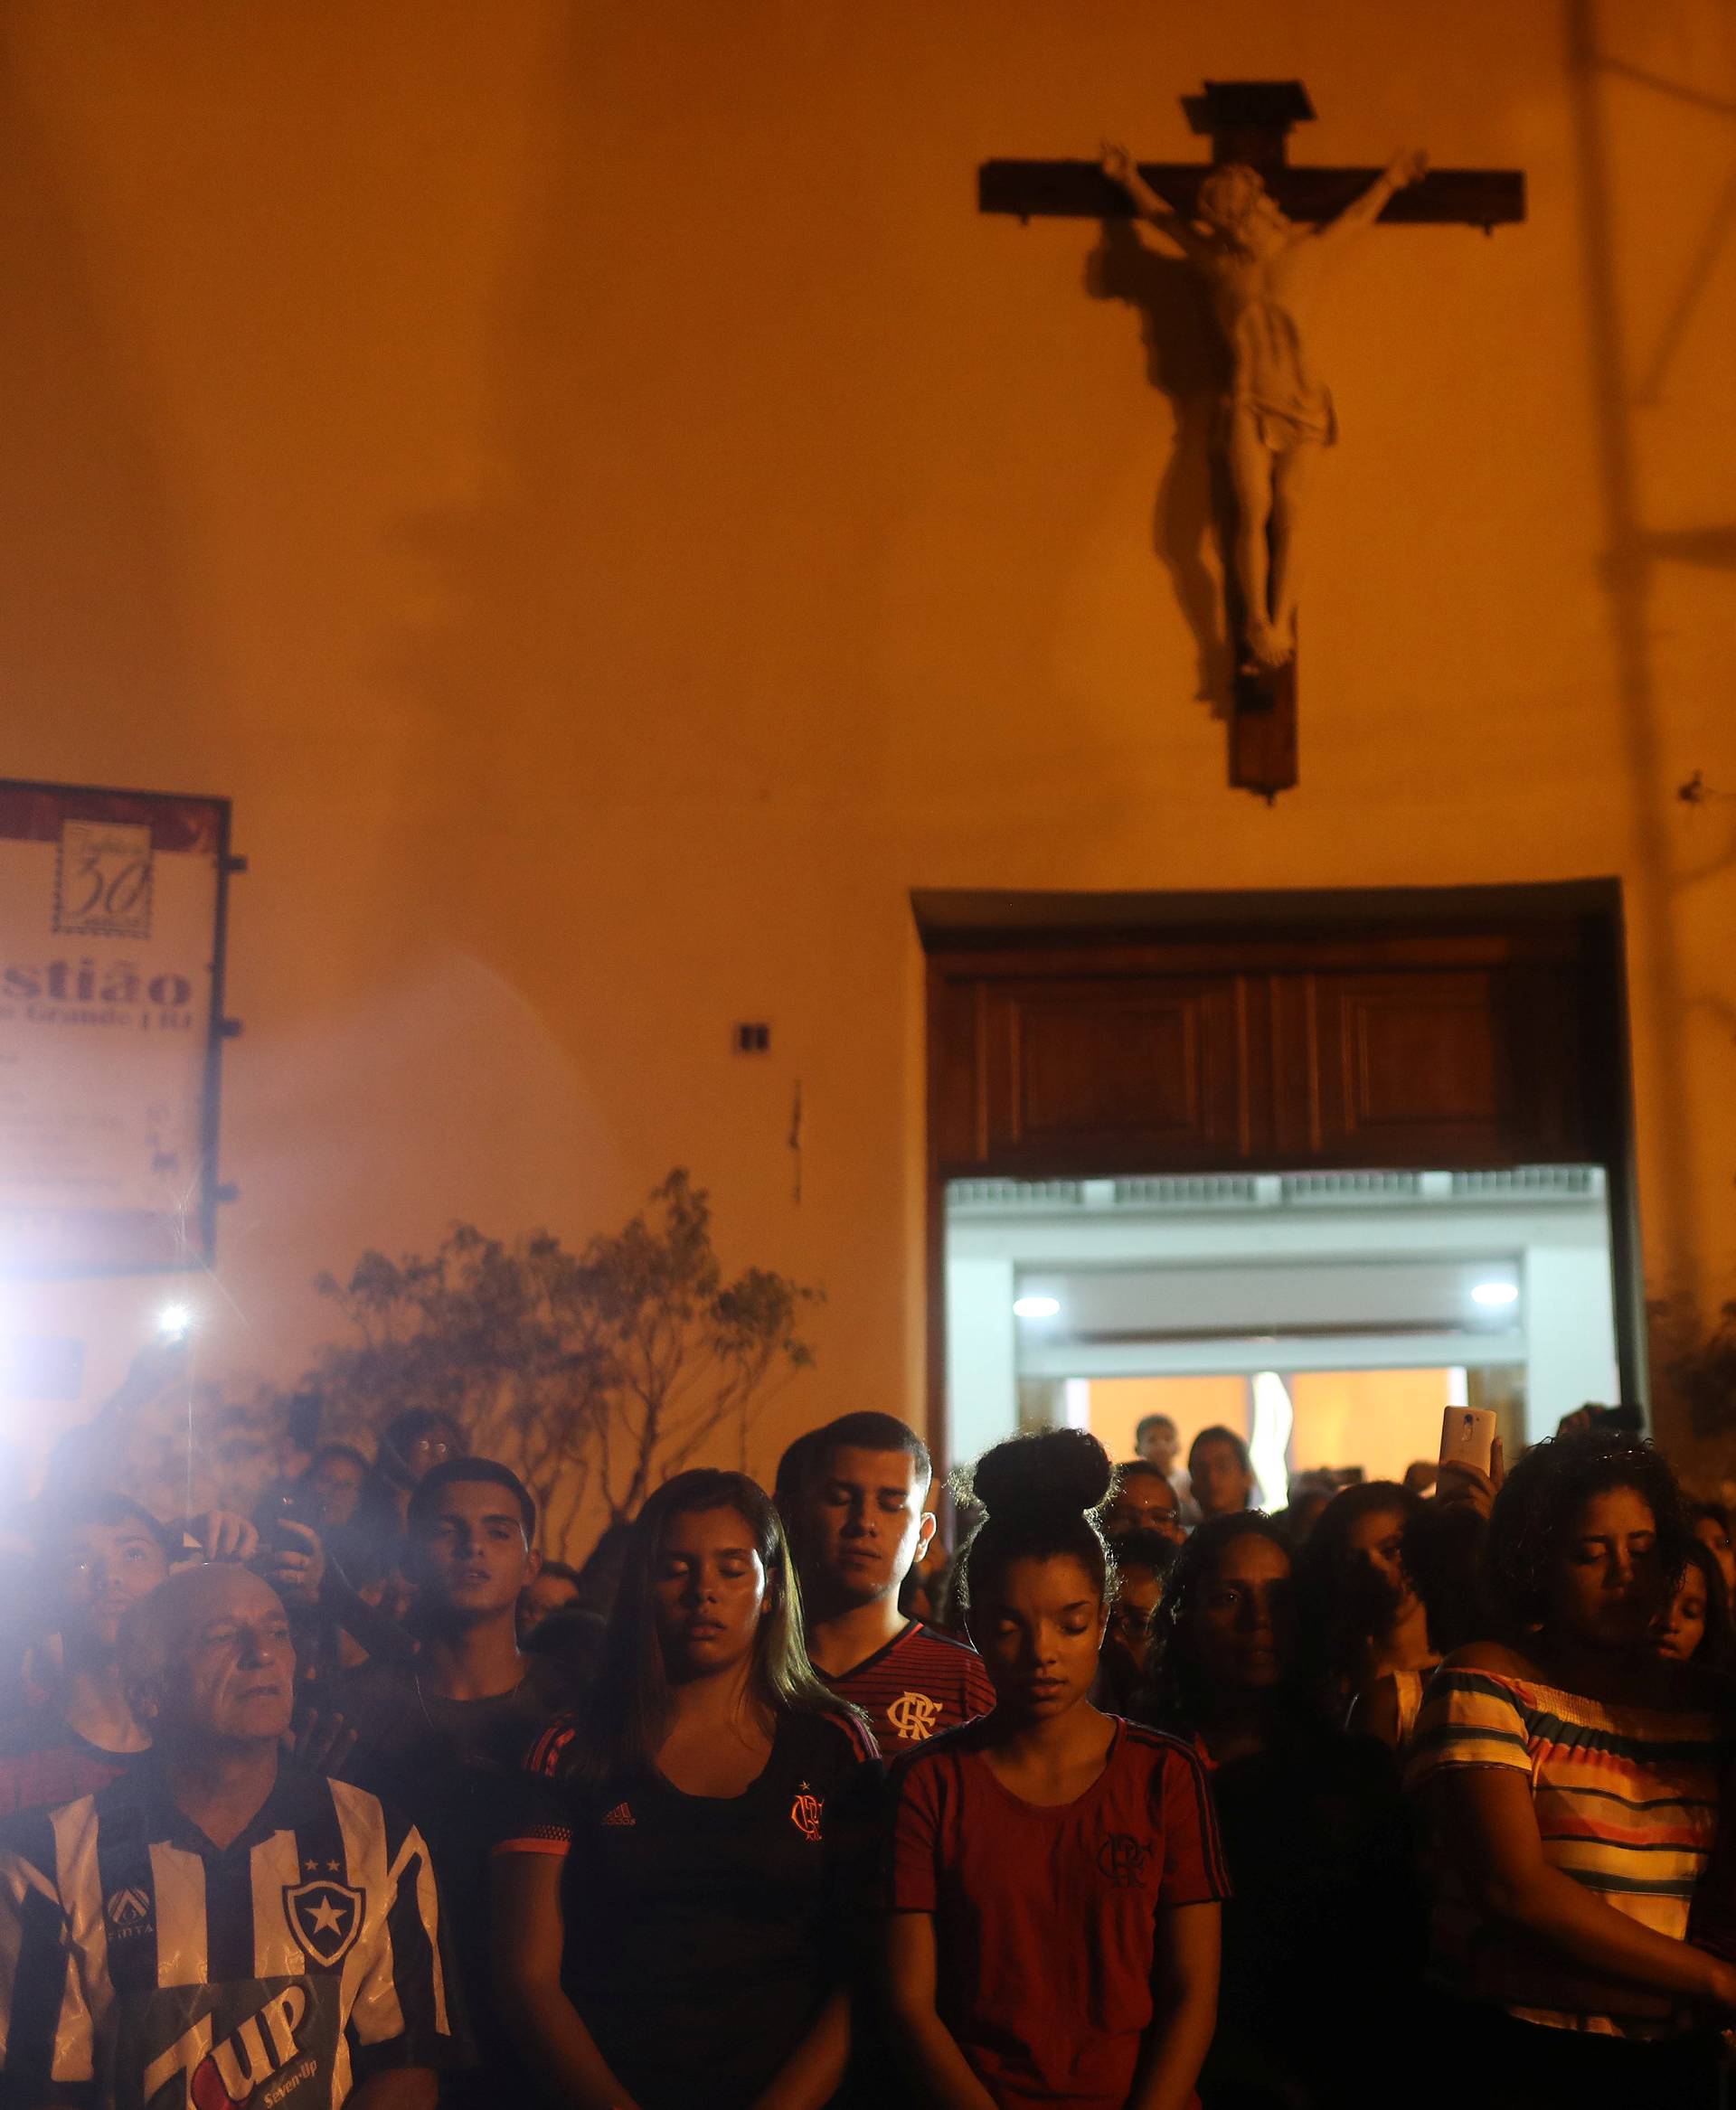 People react during a mass in memory of the victims of Flamengo club's training center deadly fire in Rio de Janeiro